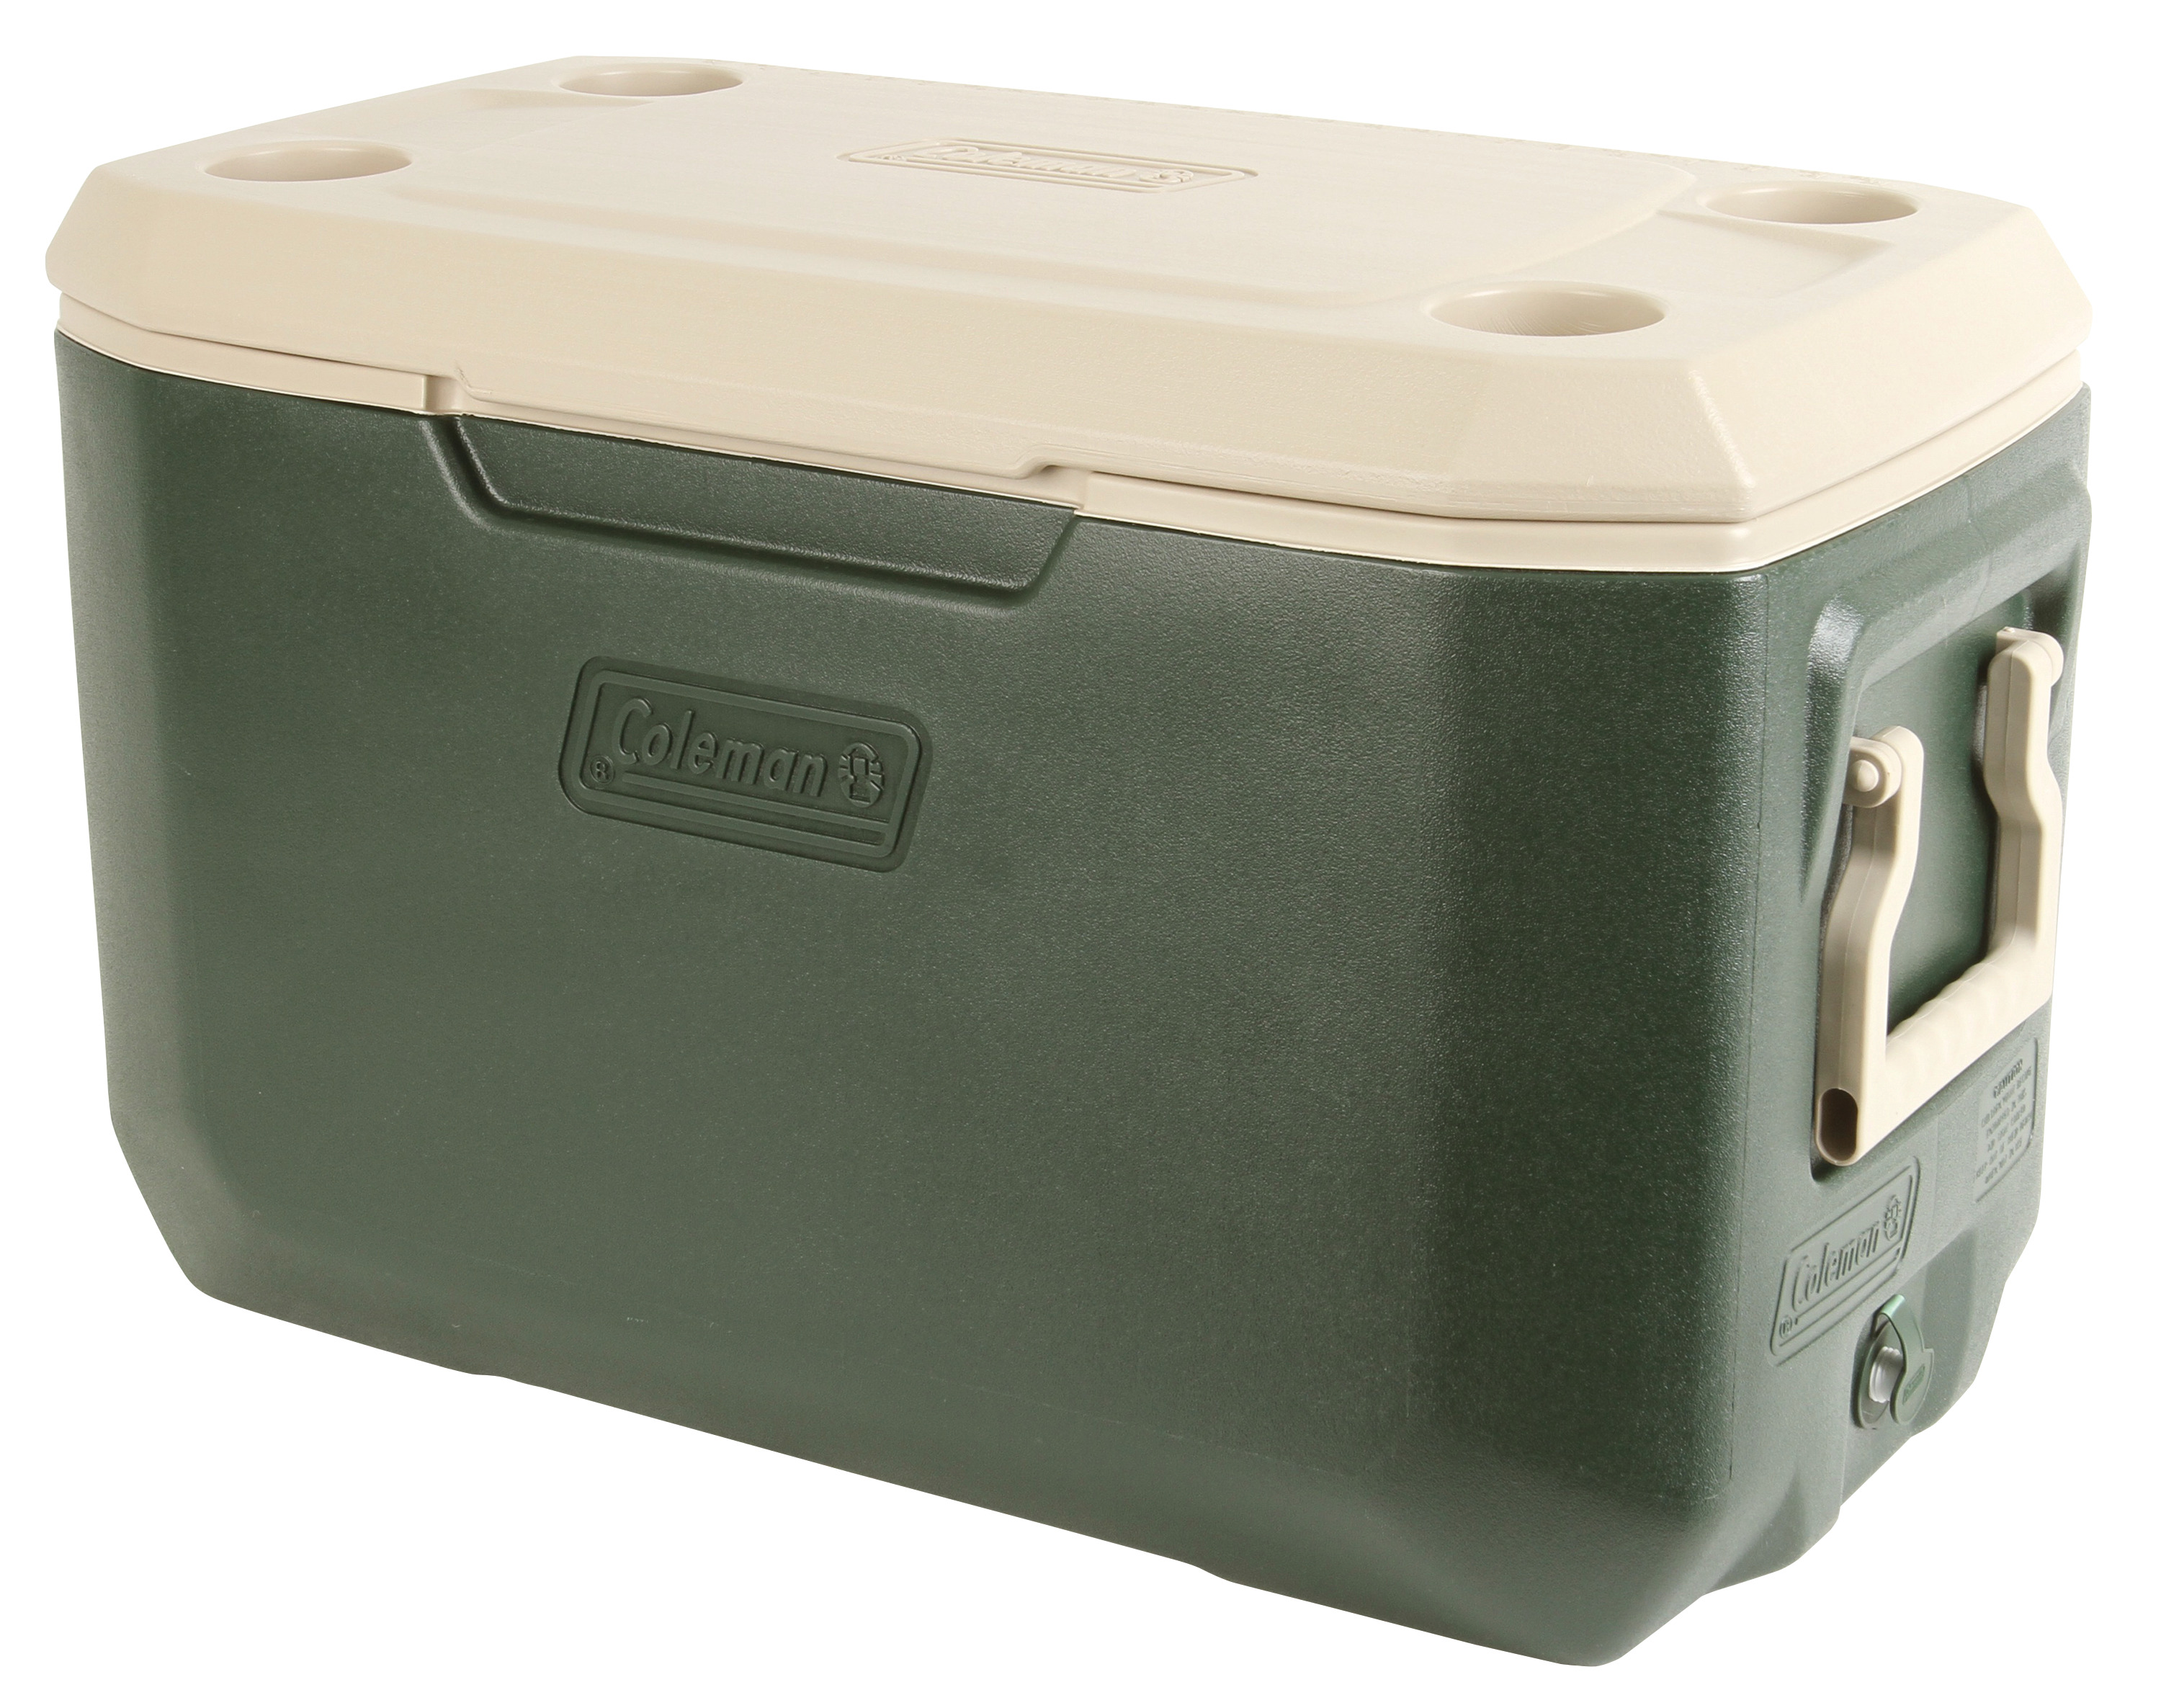 Coleman 70 Quart Xtreme 5 Day Heavy Duty Cooler, Green - image 4 of 6